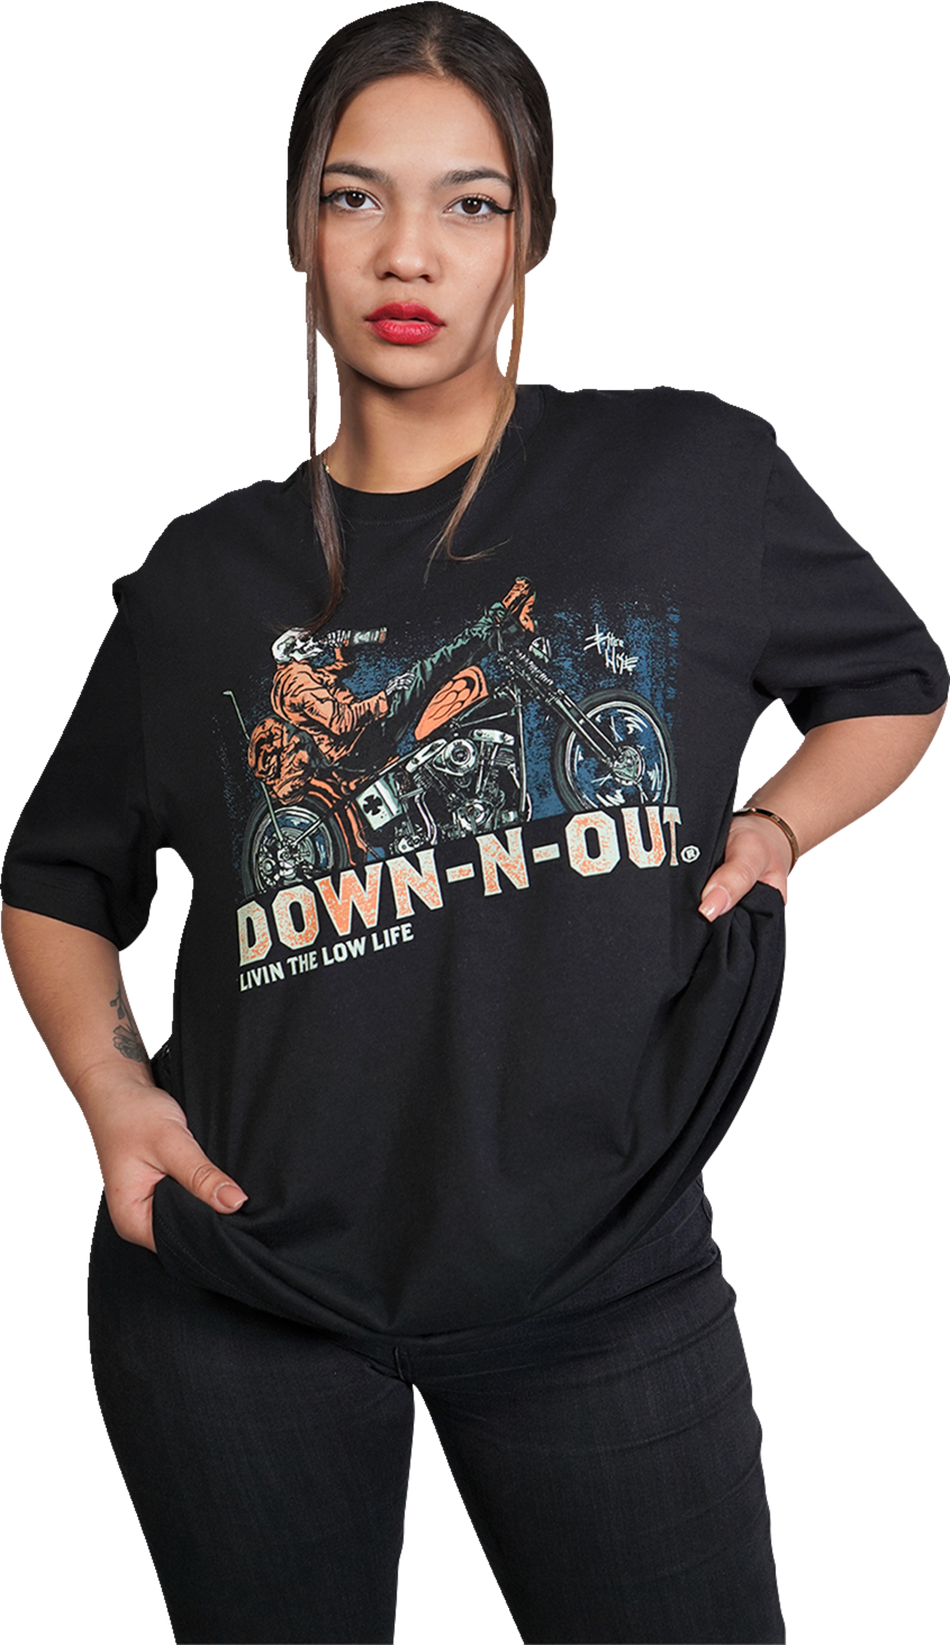 LETHAL THREAT Down-N-Out Party First Safety Second - Black - 3XL DT10043XXXL